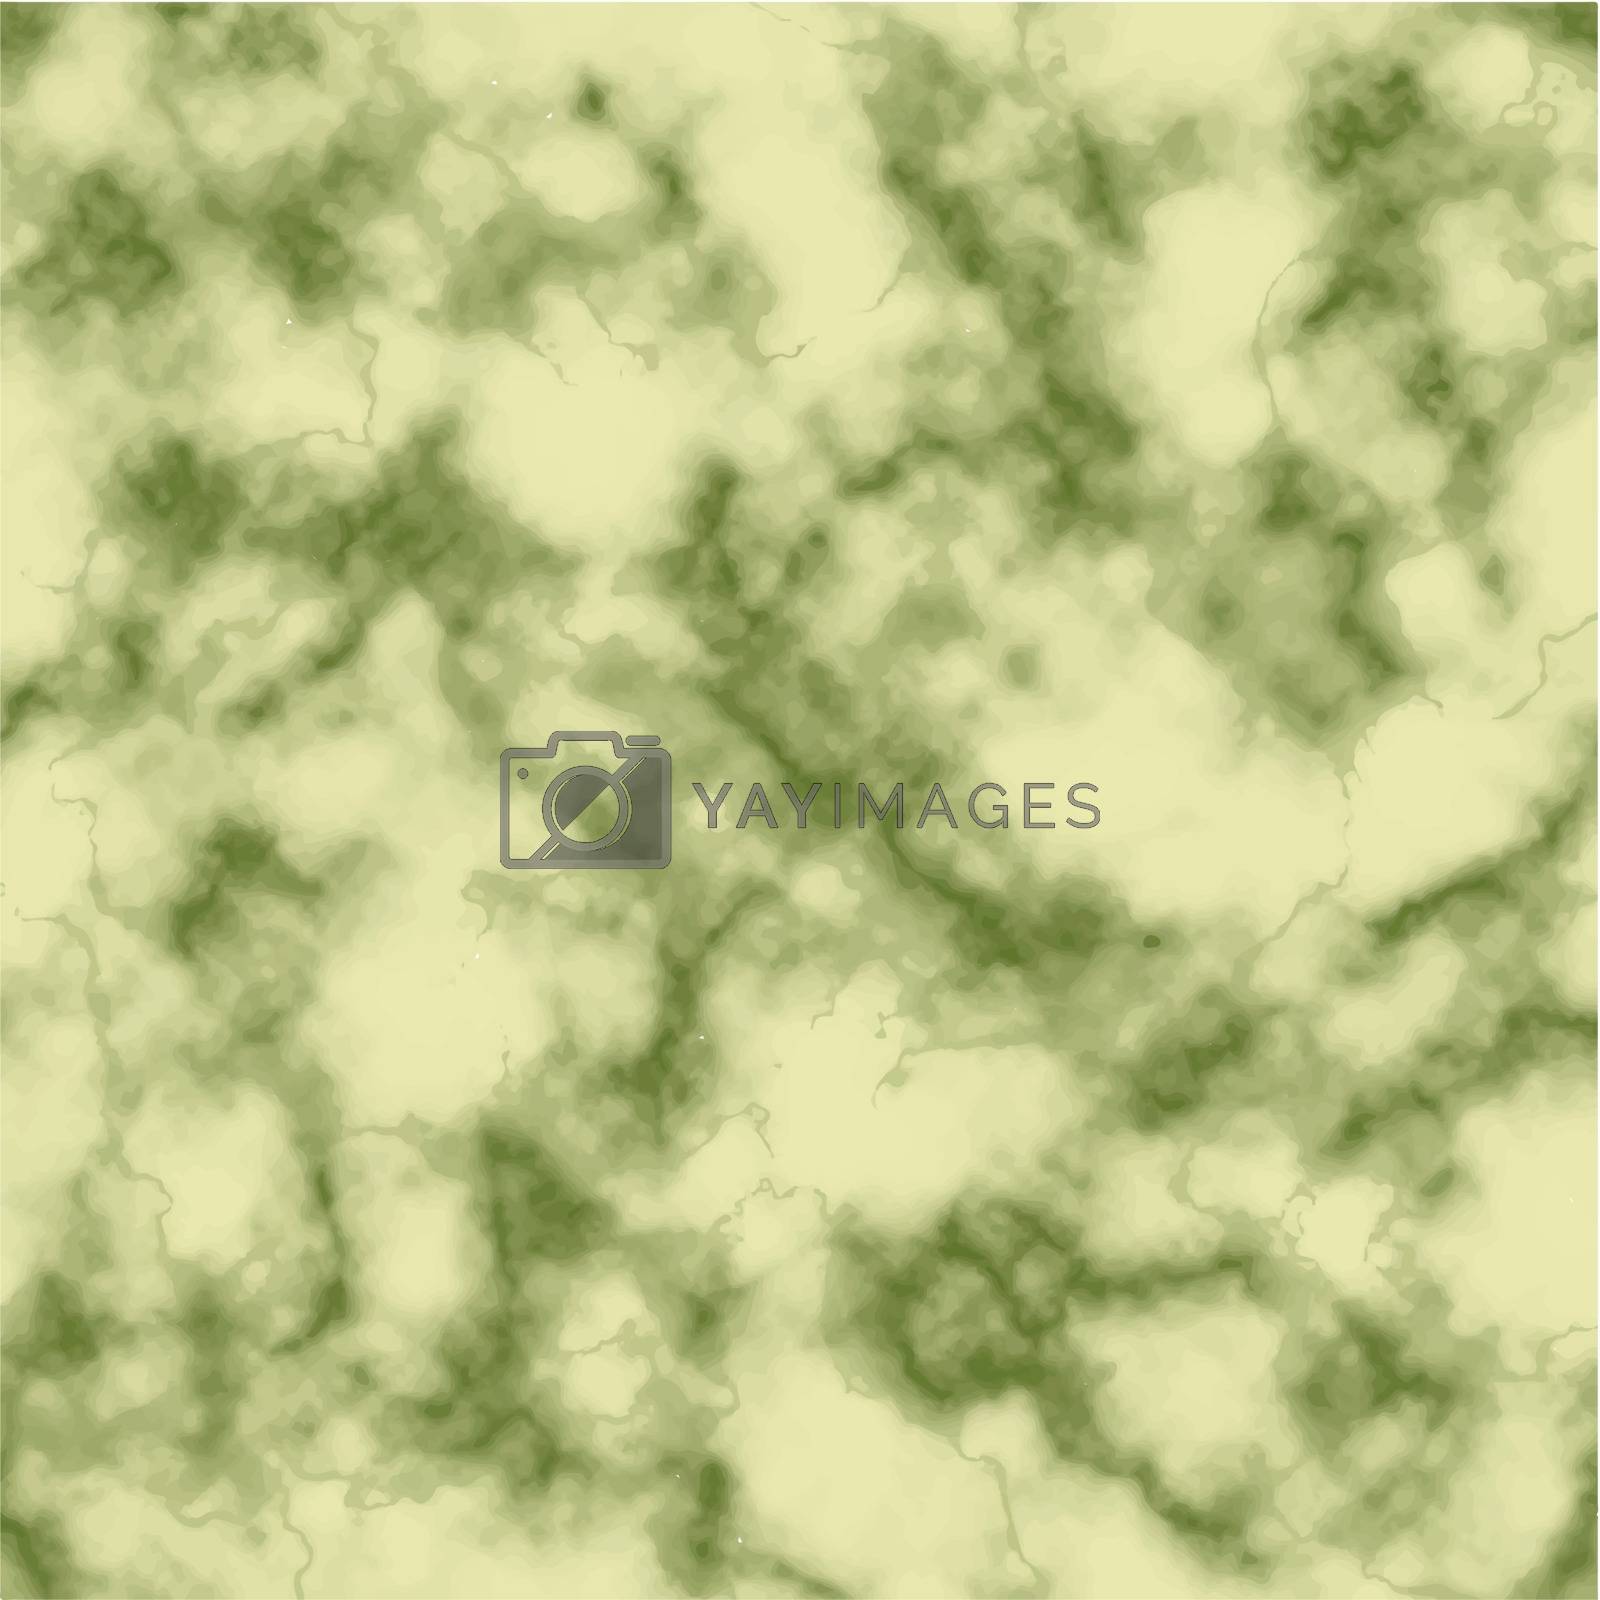 Royalty free image of Abstract marble effect background by balasoiu